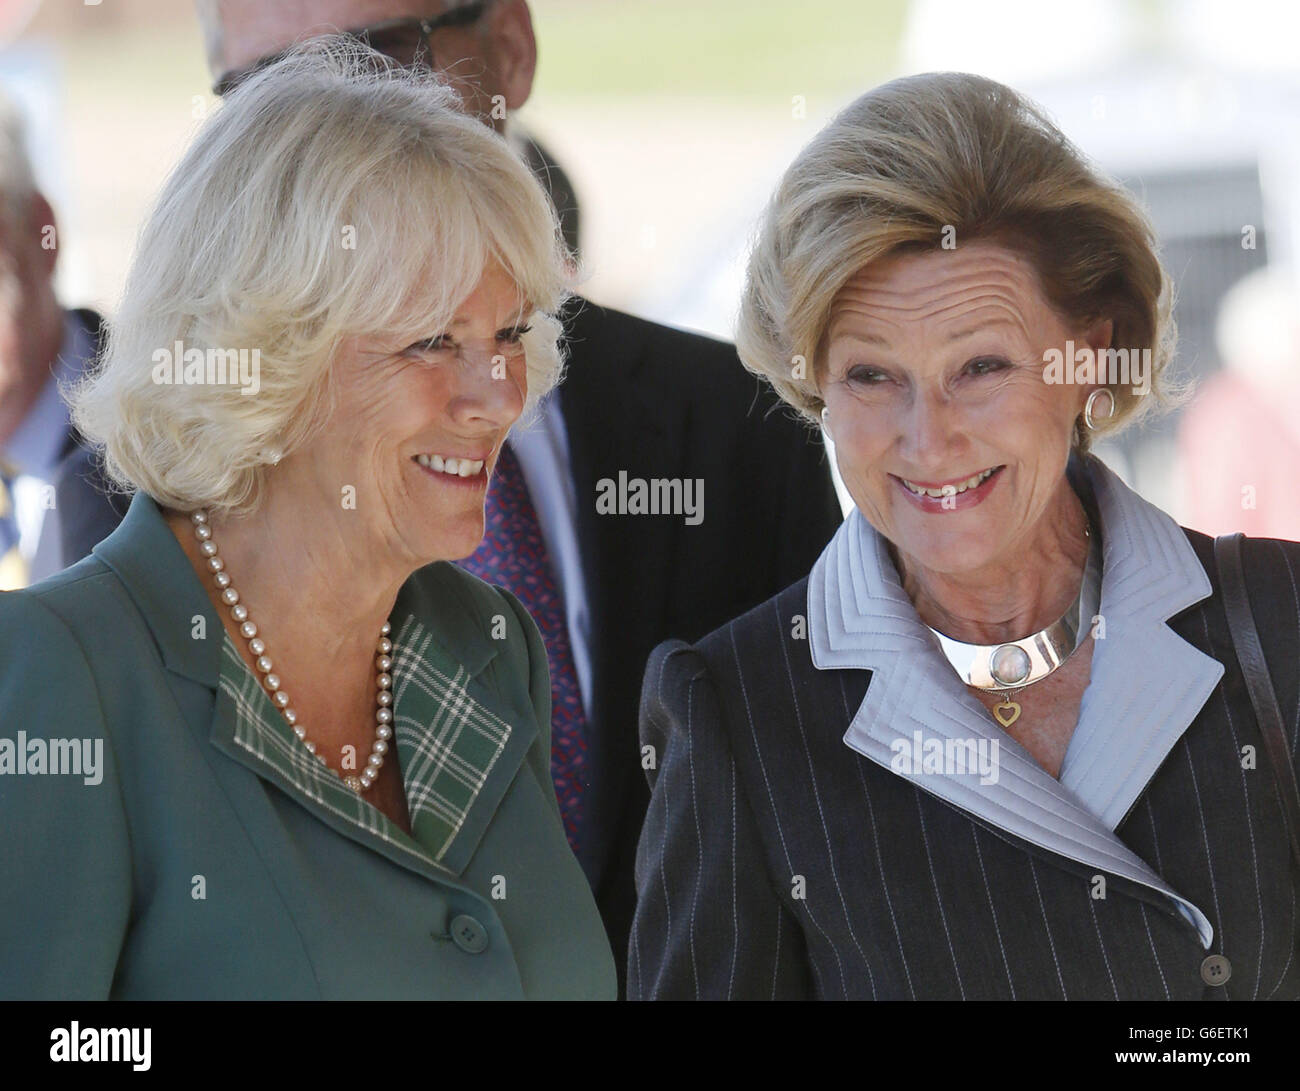 The Duchess of Cornwall and the Queen of Norway during the official opening of a new Maggie's cancer support centre in Aberdeen, Scotland. Stock Photo